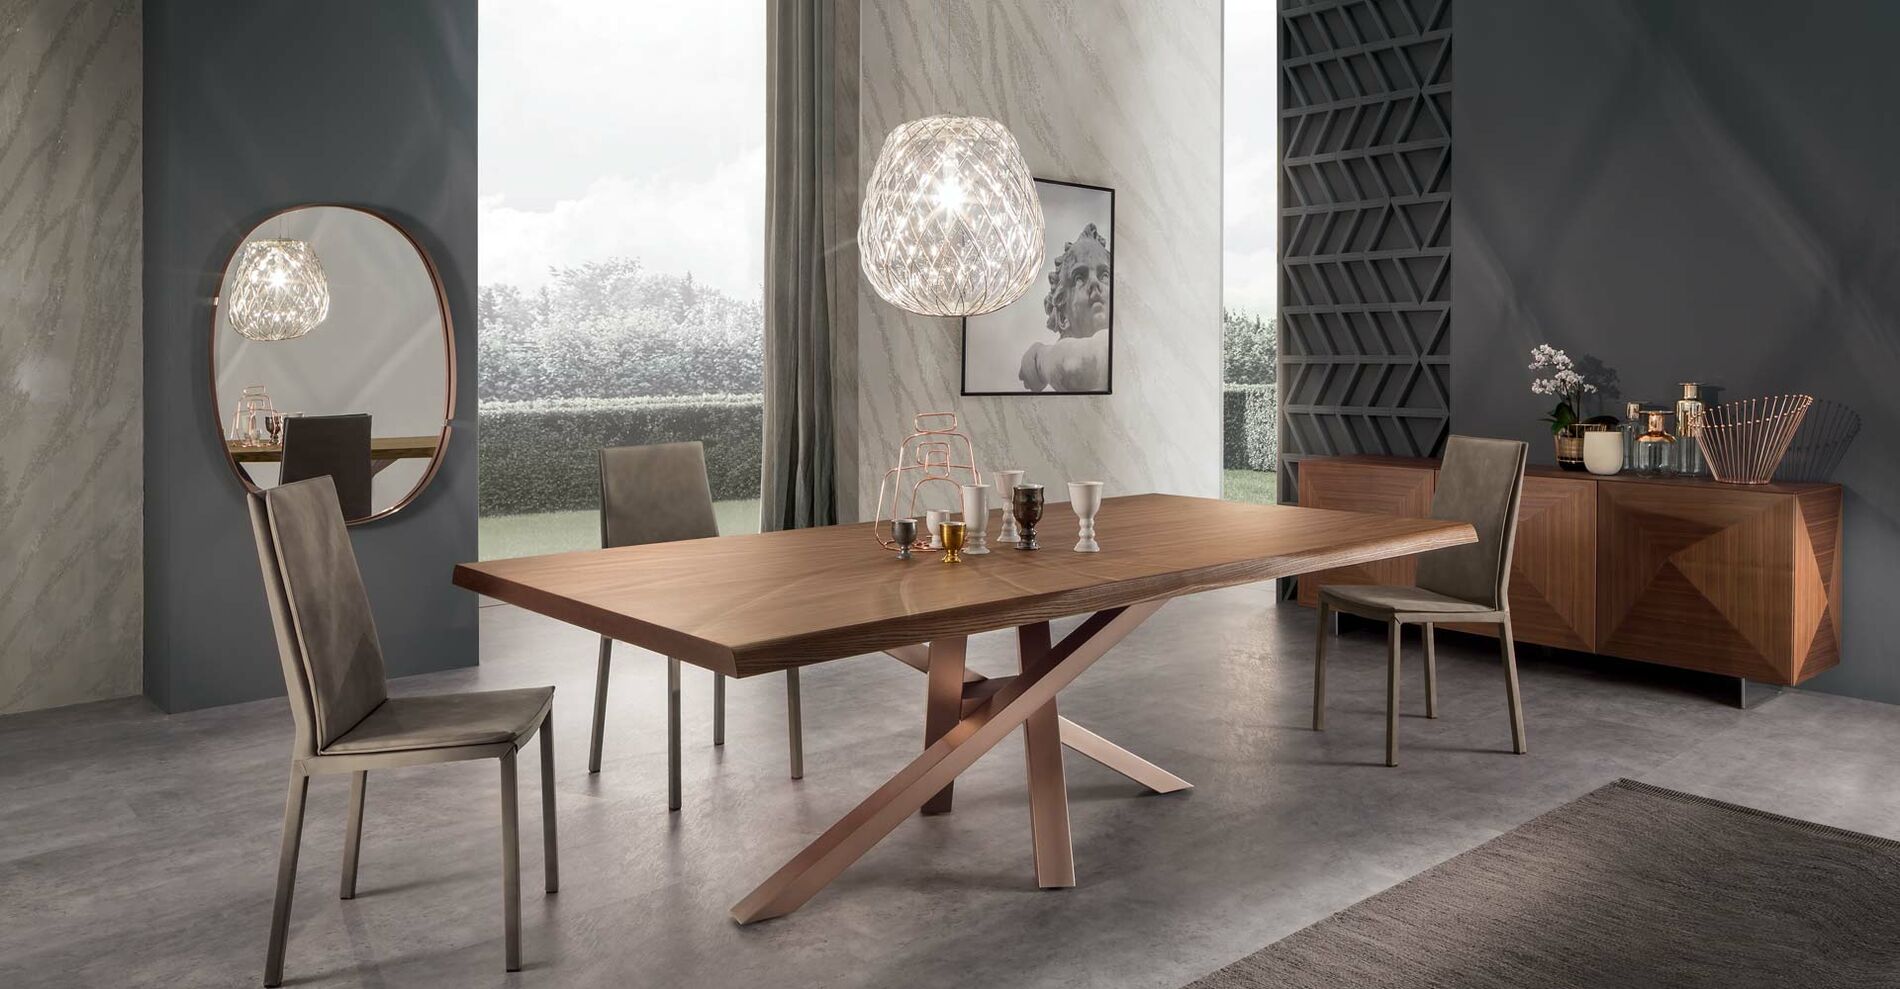 Wooden Modern Dining Table Shangai - Riflessi - Design Made in Italy